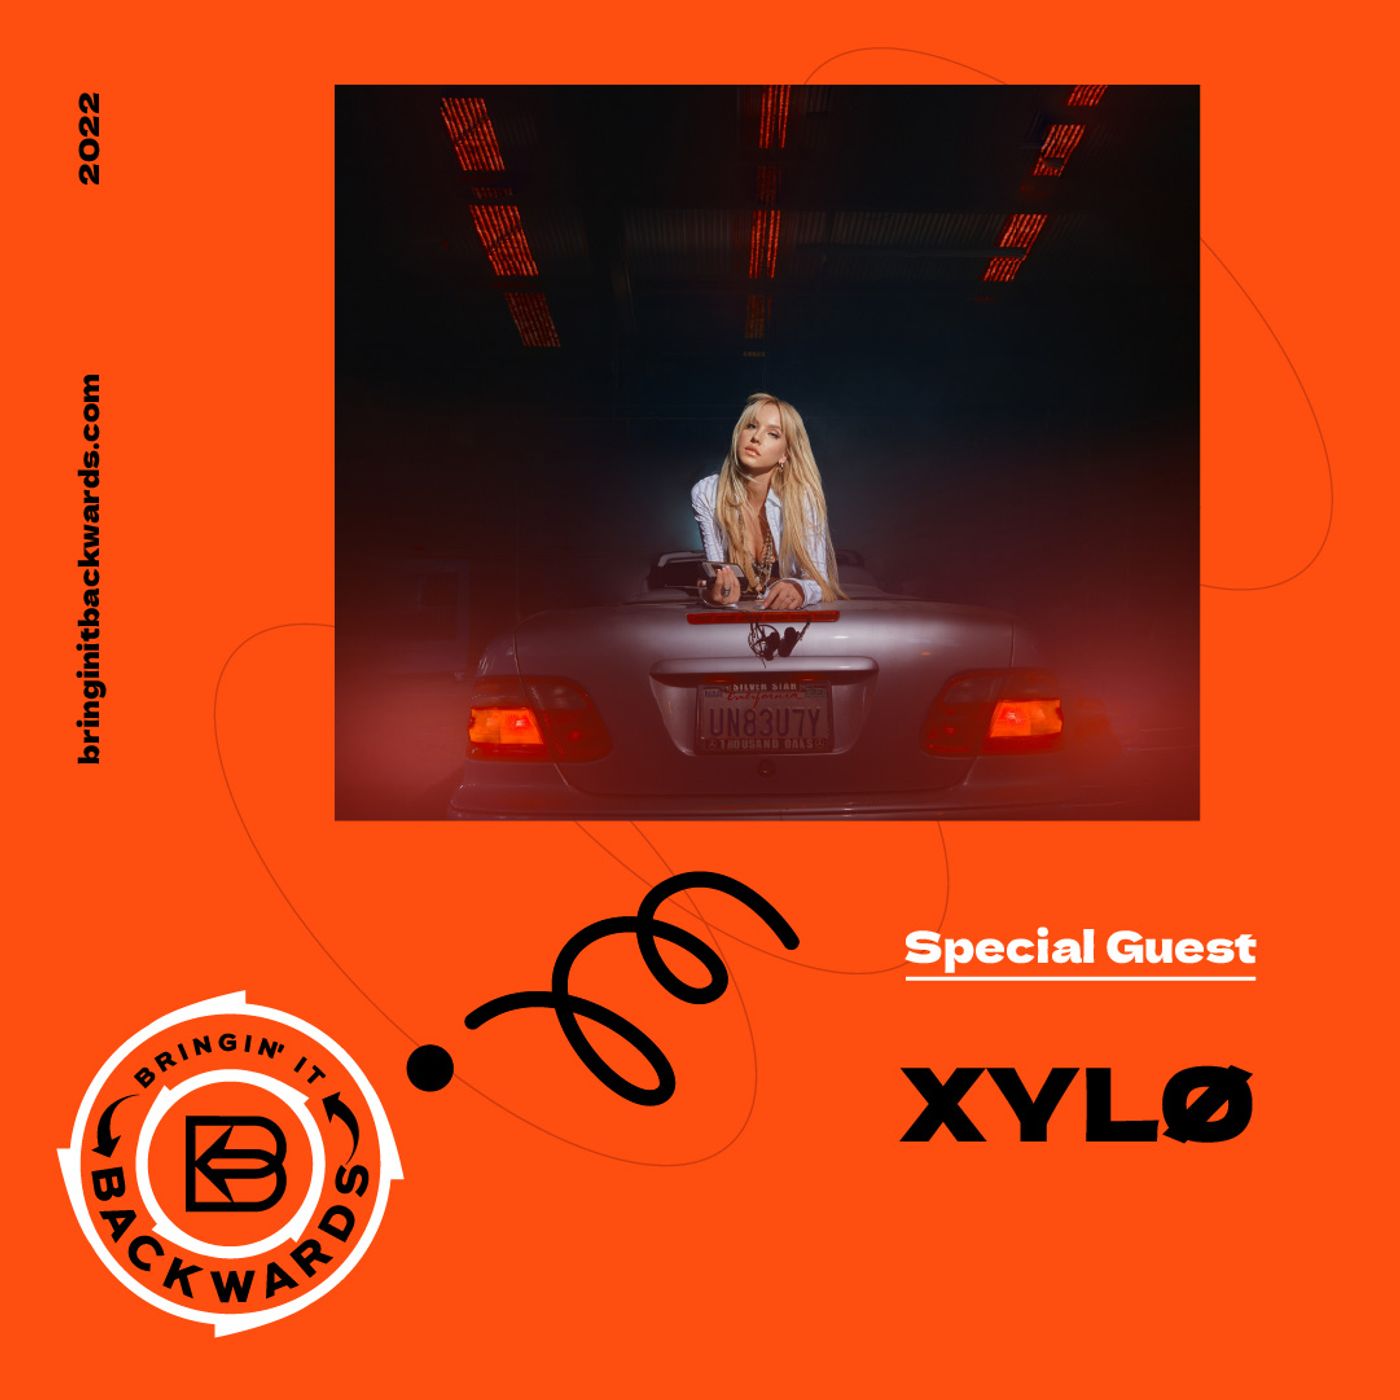 Interview with XYLØ